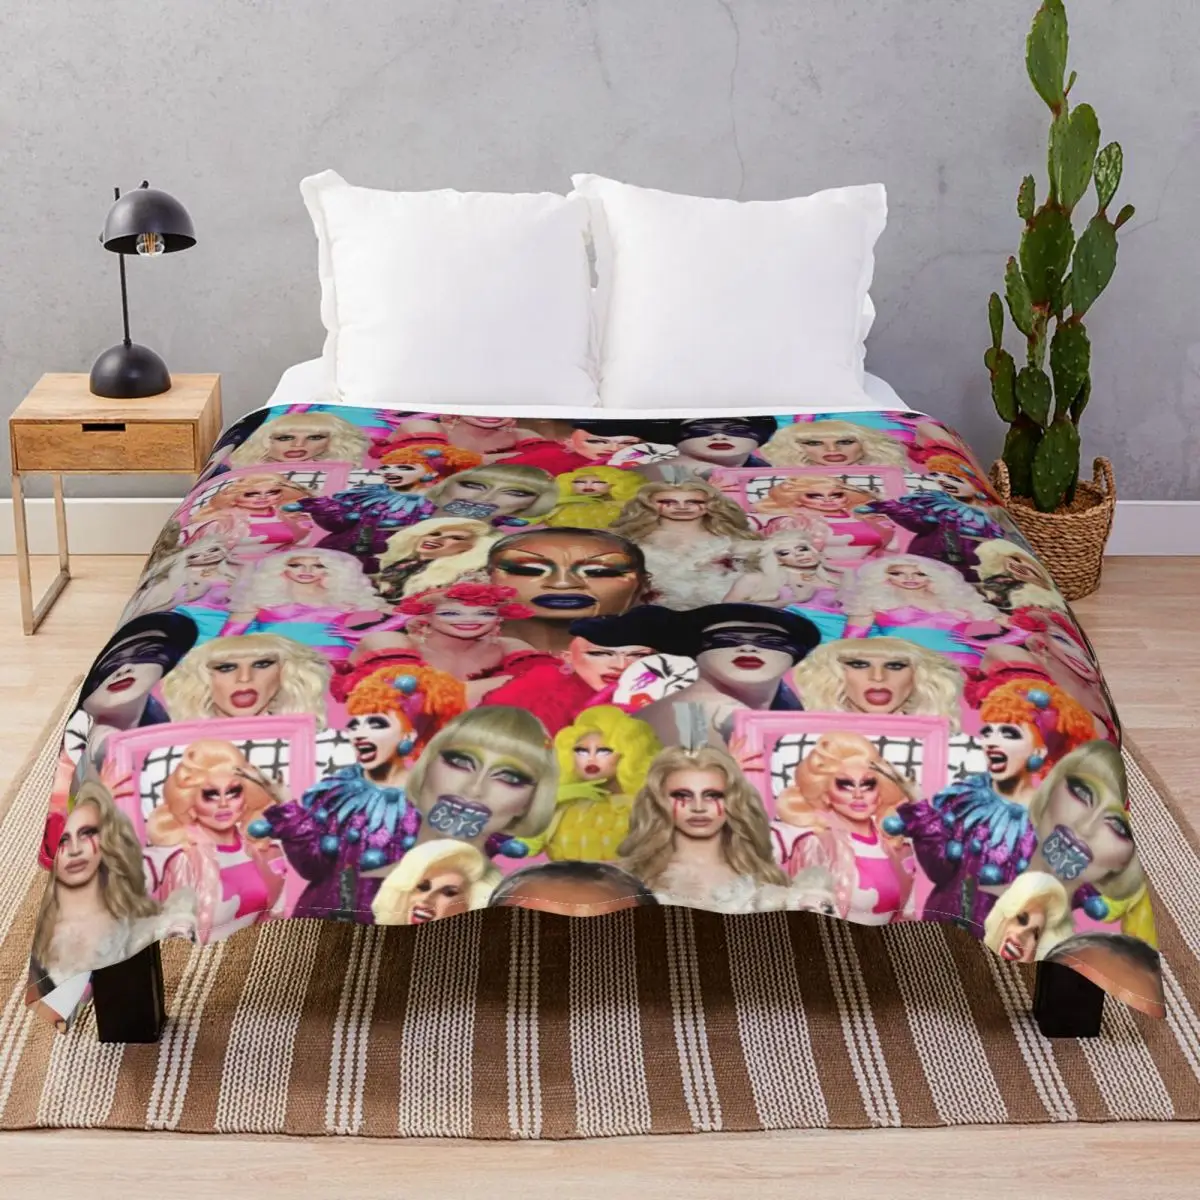 Rupaul Drag Race Collage Blankets Fleece Decoration Super Soft Throw Blanket for Bed Home Couch Camp Office